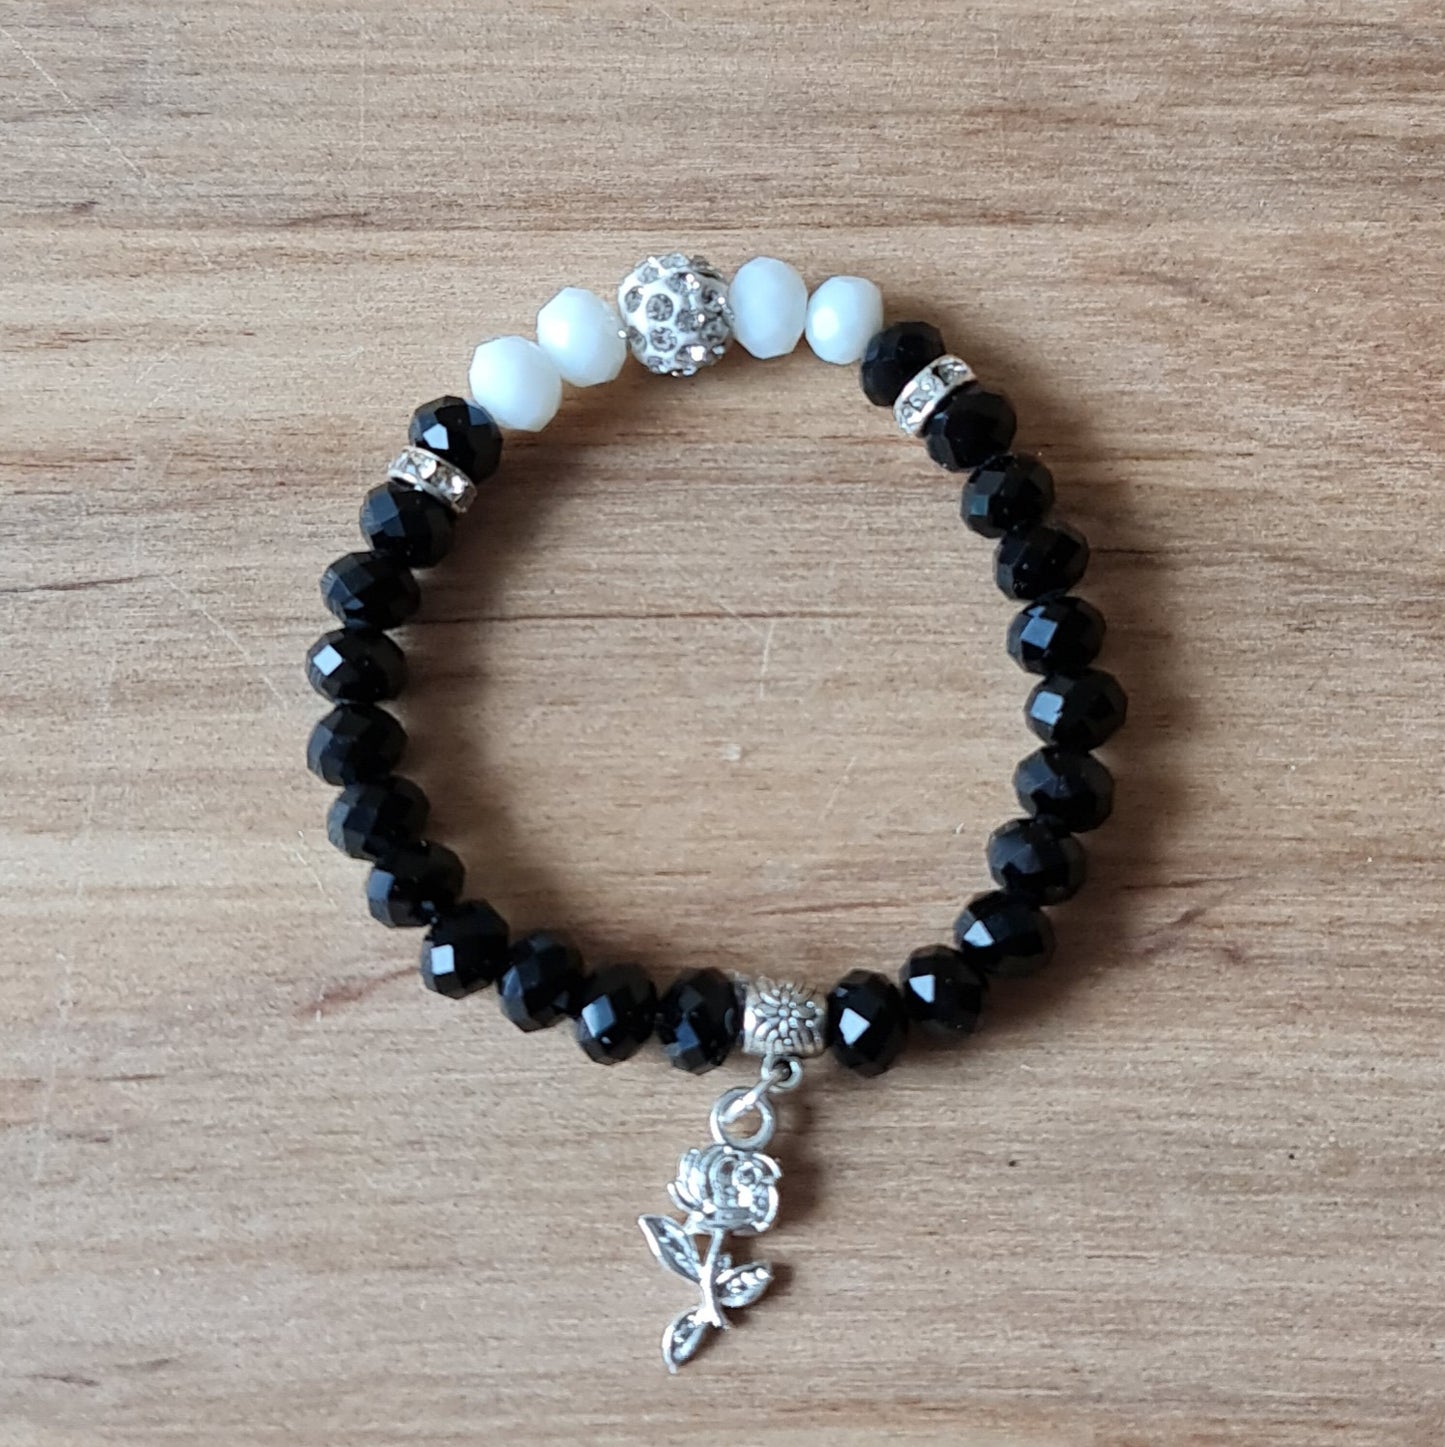 Crystal Bracelet (Black / White and Silver Crystal Accent) with Silver Rose Charm (APU2)